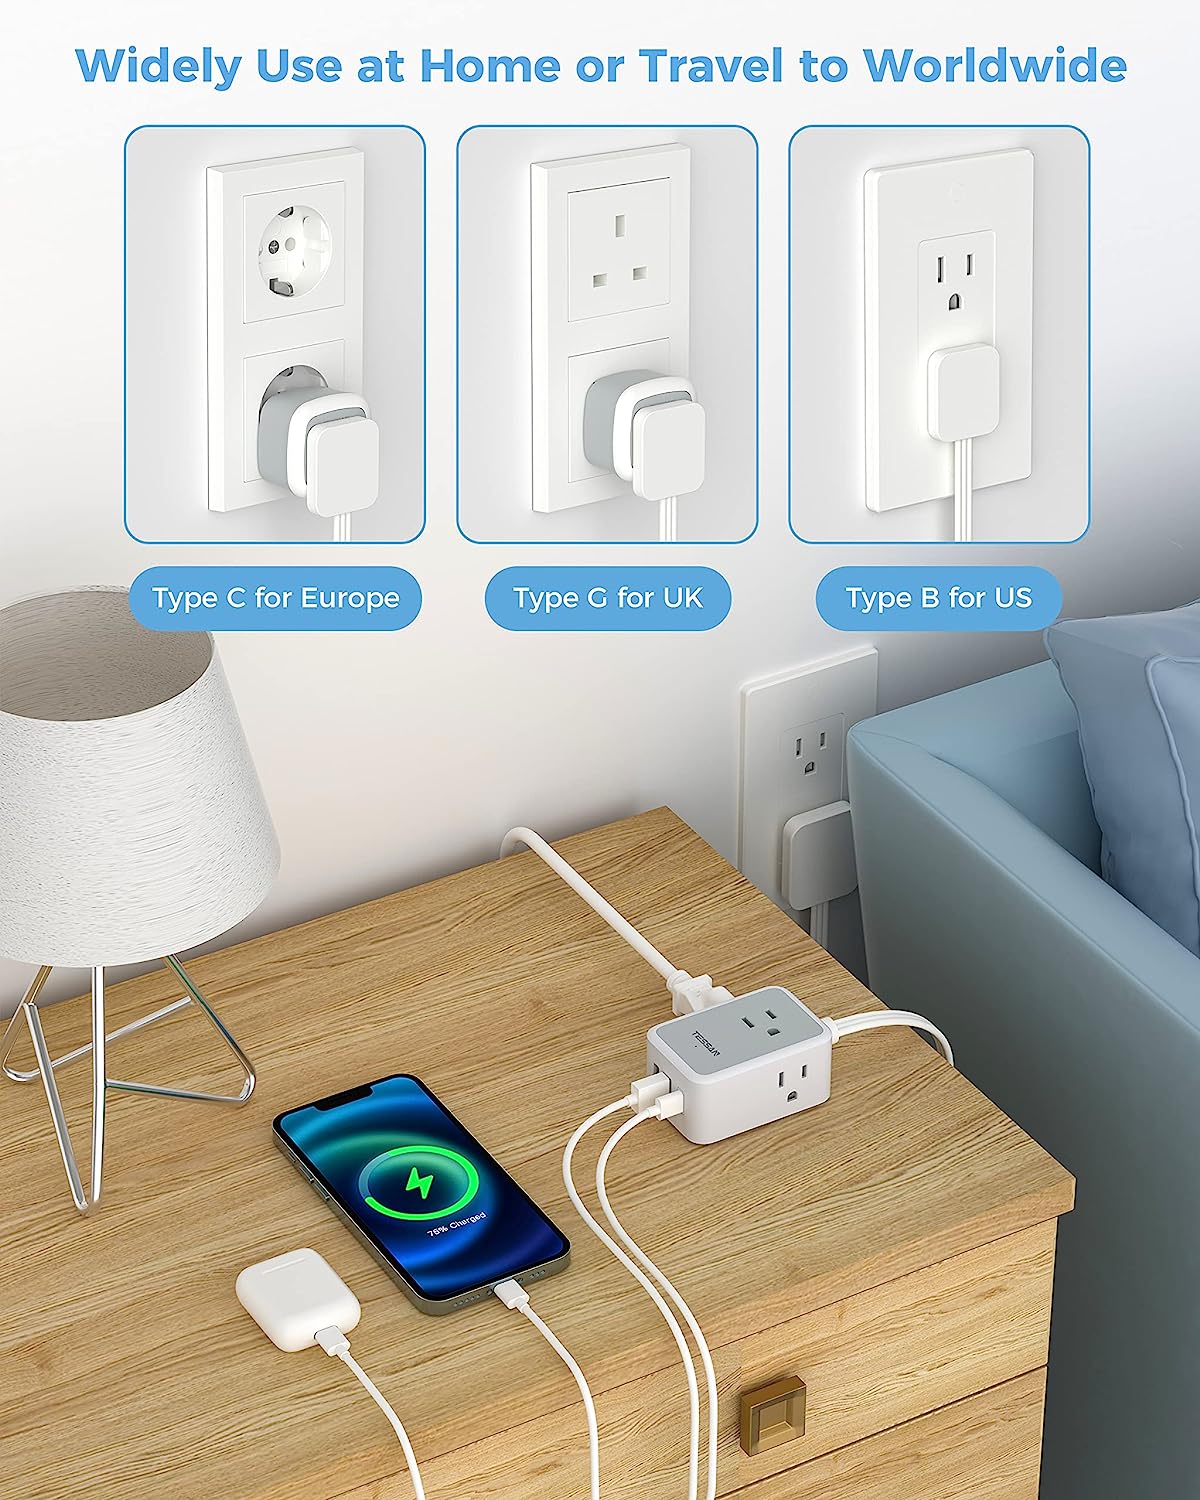 TESSAN European Travel Plug Adapter with Power Strip, EU UK Travel Extension Cord with 3 Outlet 3 USB (1 USB C)